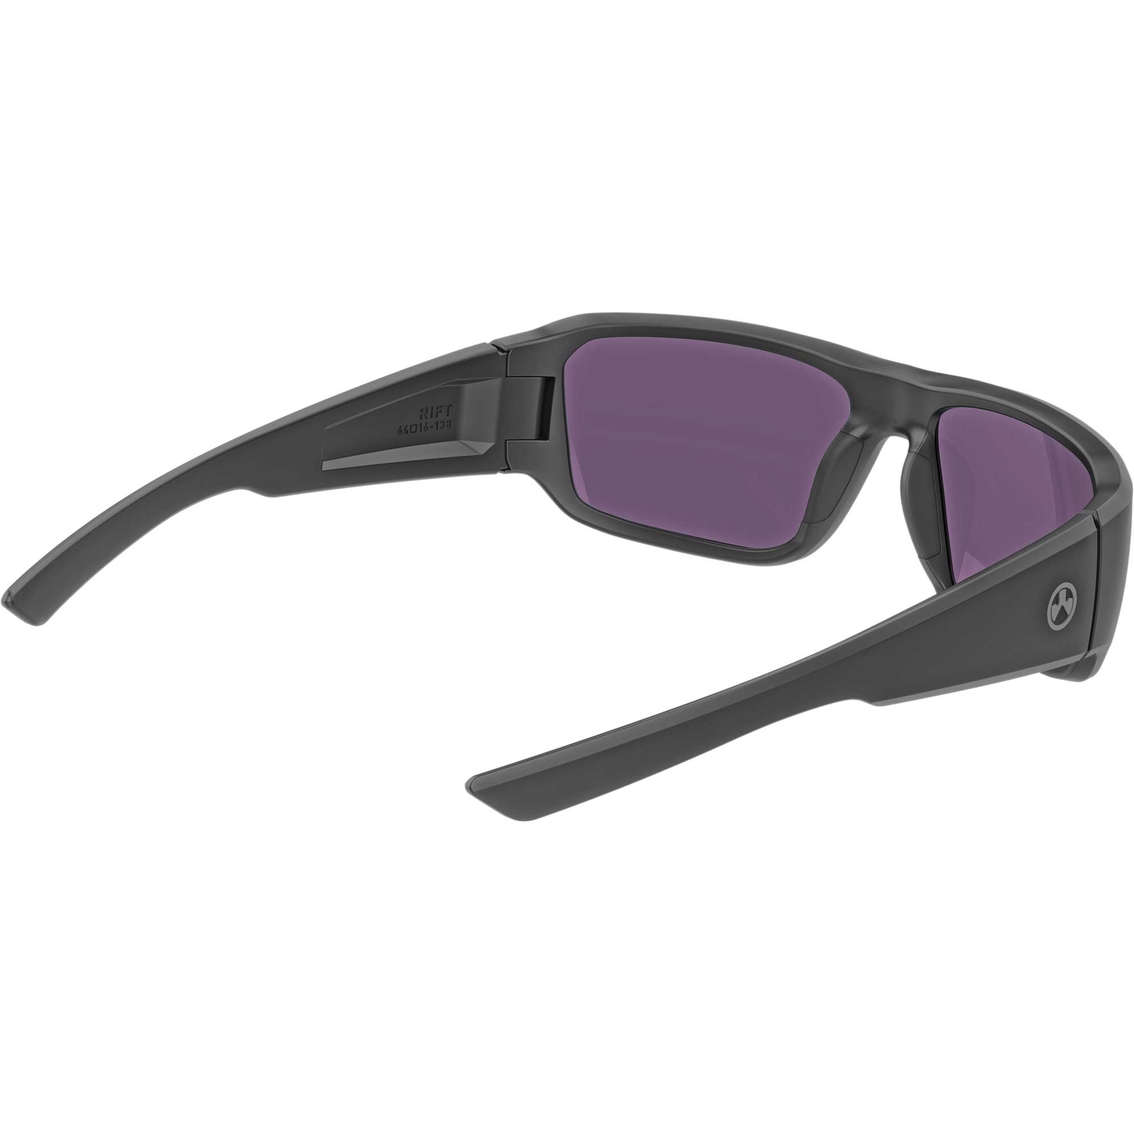 Magpul Rift Eyewear, Black Frame and Polarized Violet Lens with Green Mirror - Image 2 of 2